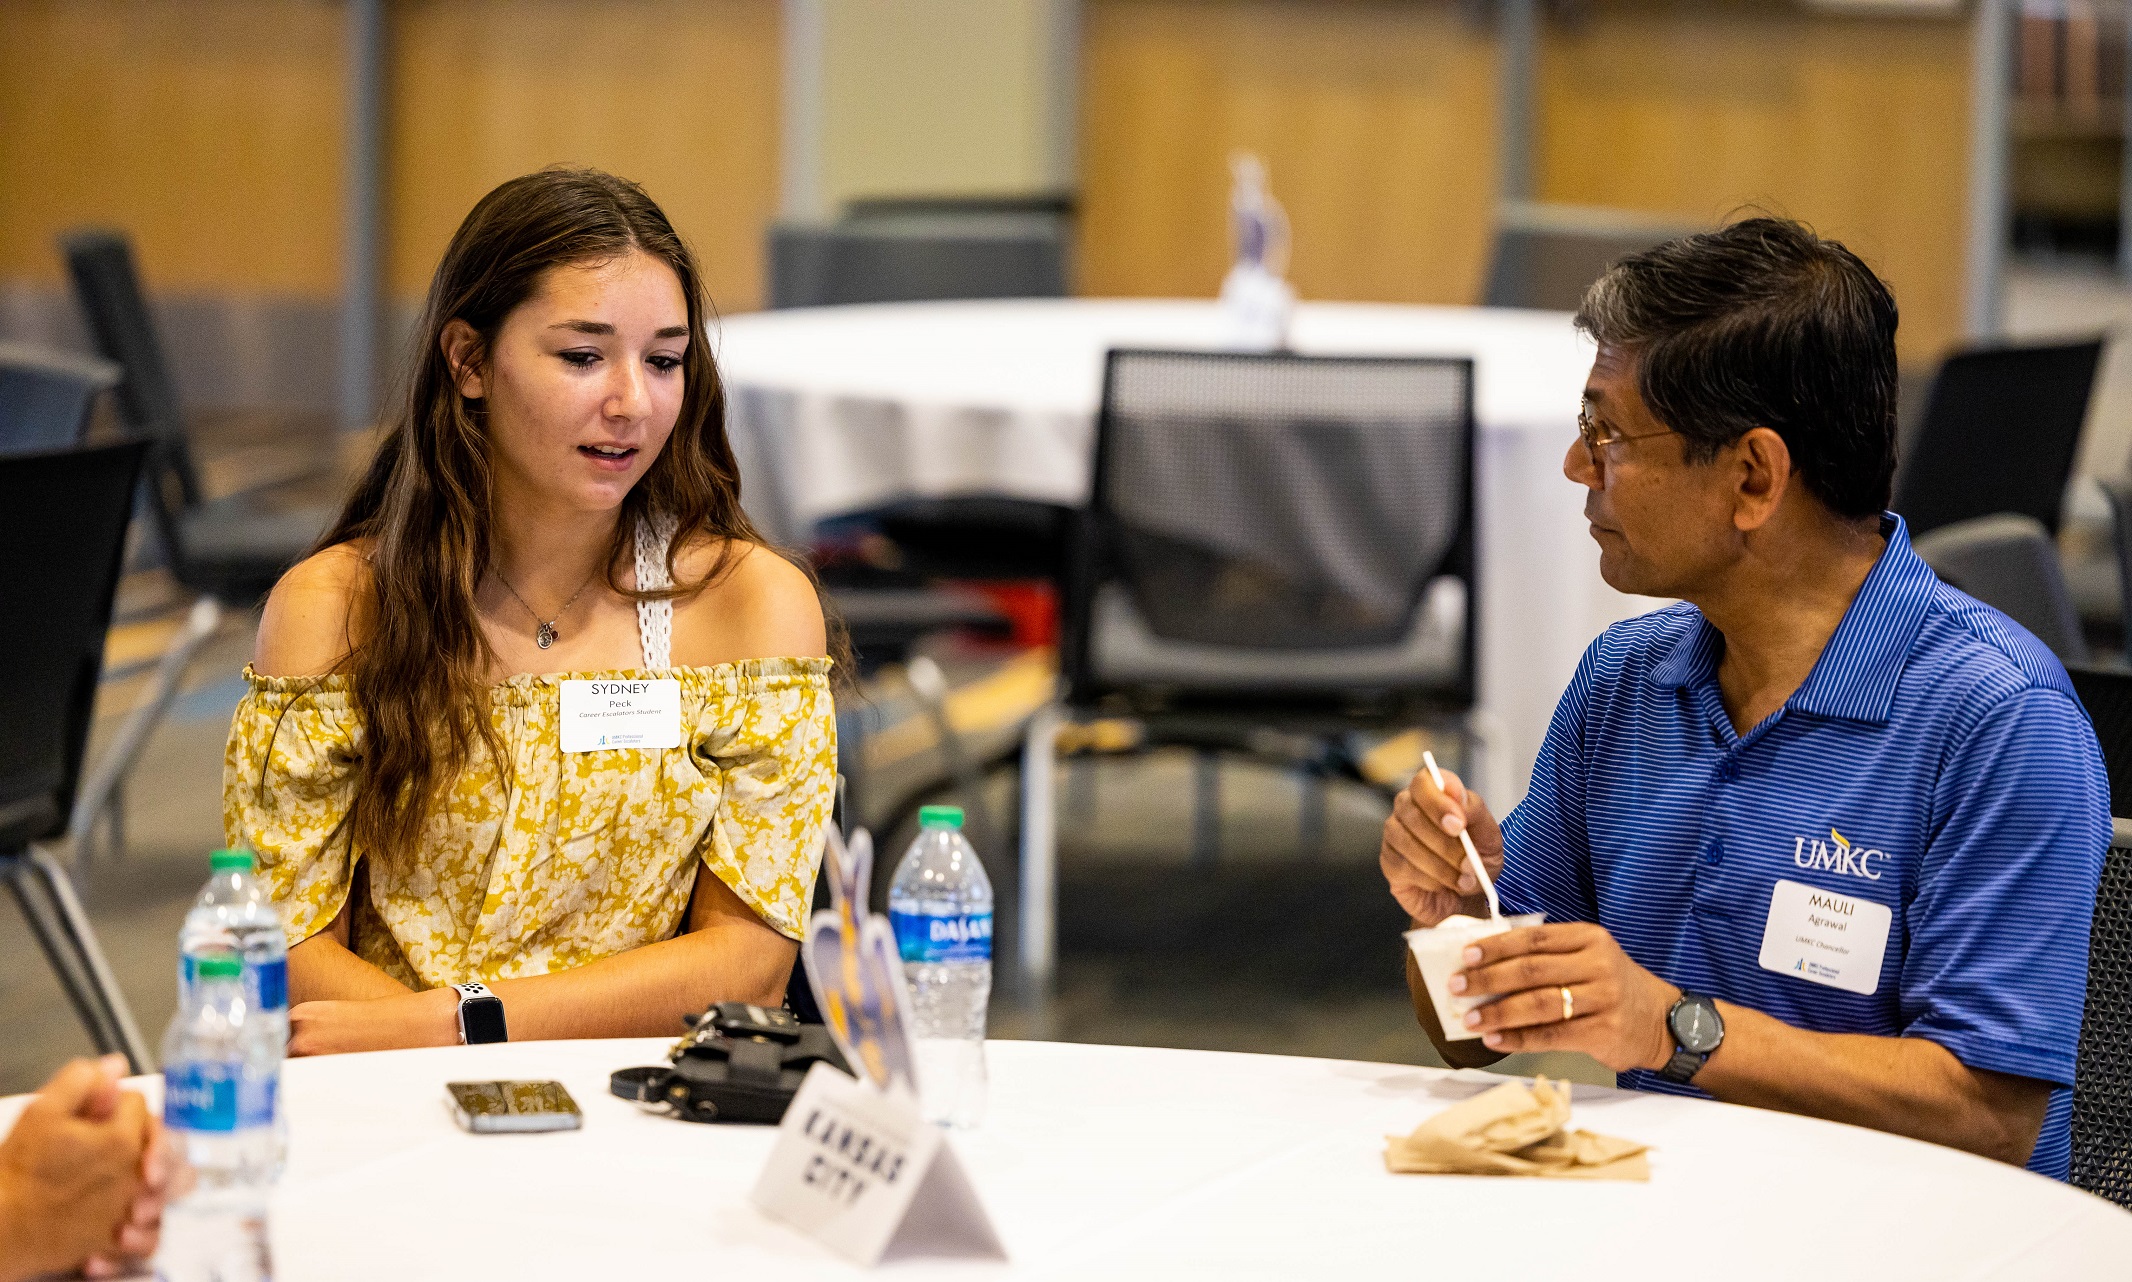 Incoming student Sydney Peck talks with Chancellor Agrawal as they eat ice cream at a table